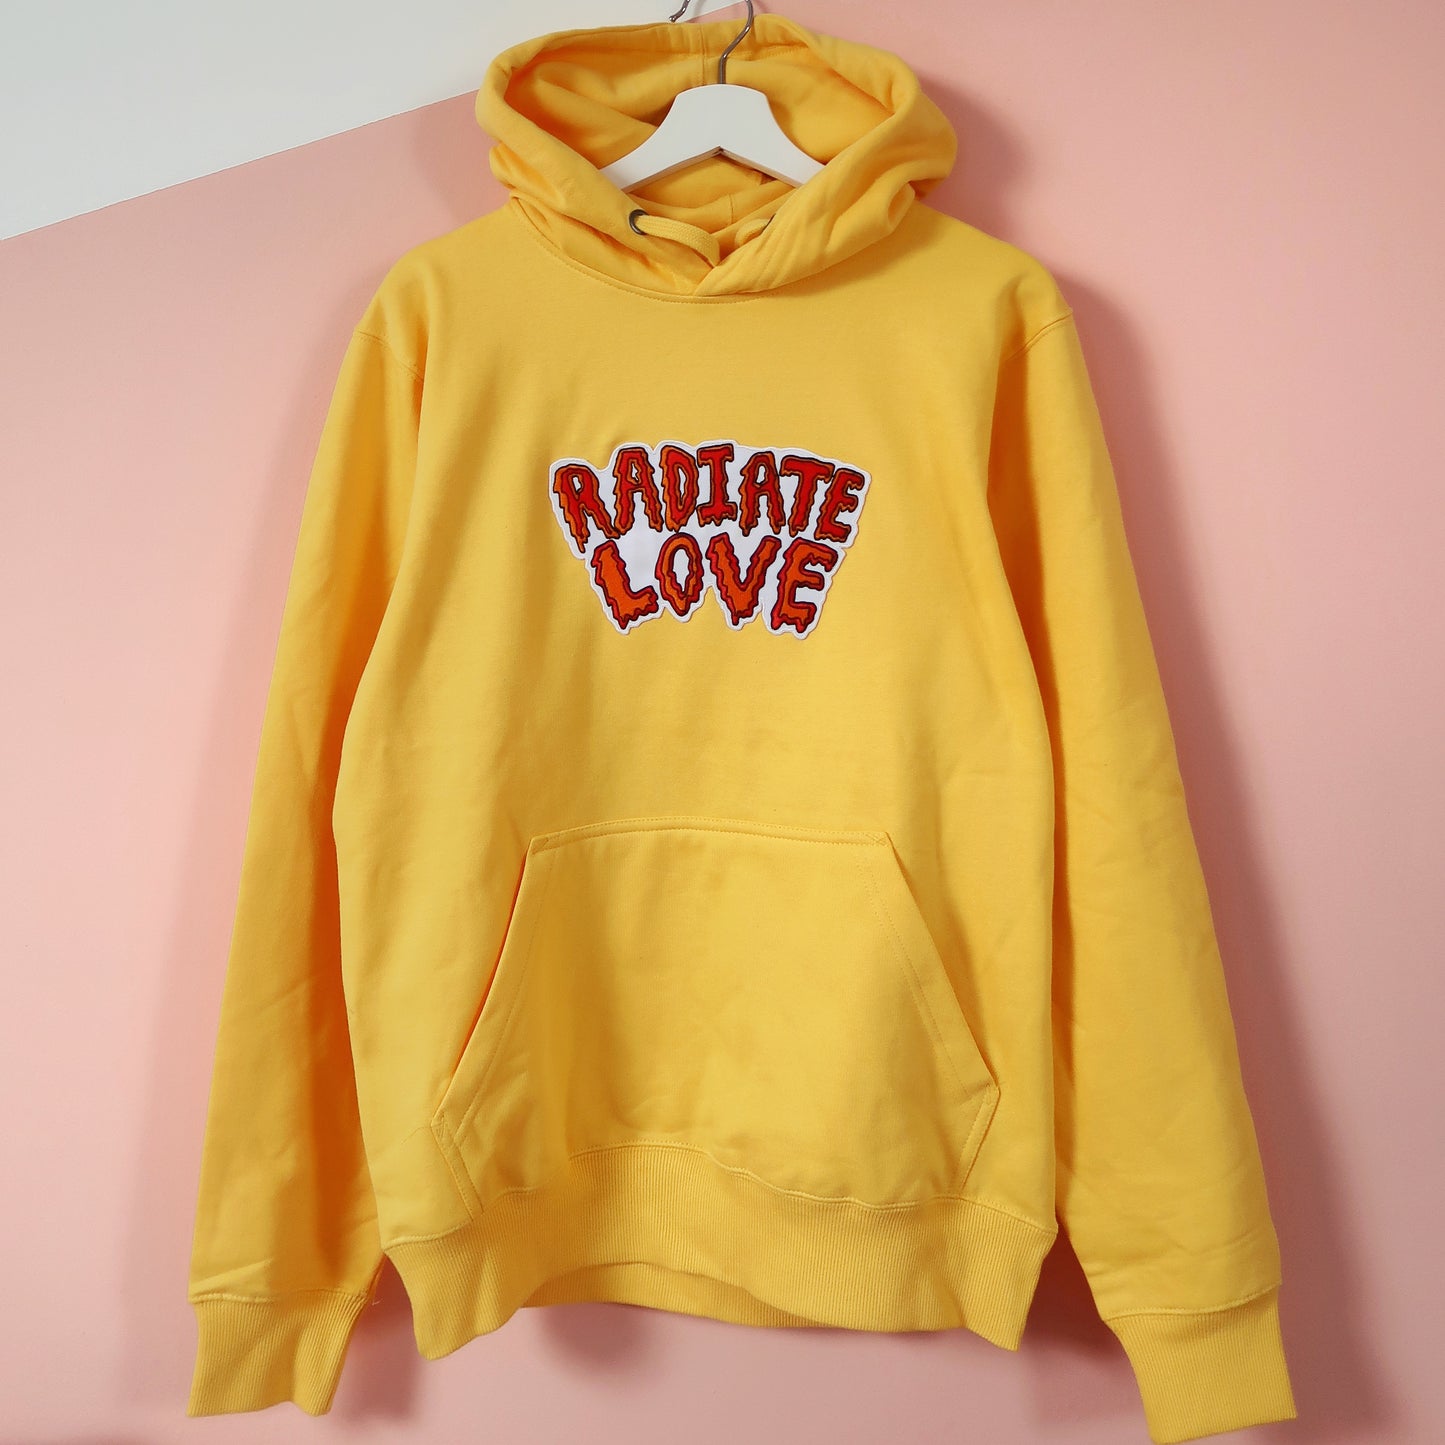 radiate love embroidered hoodie - yellow